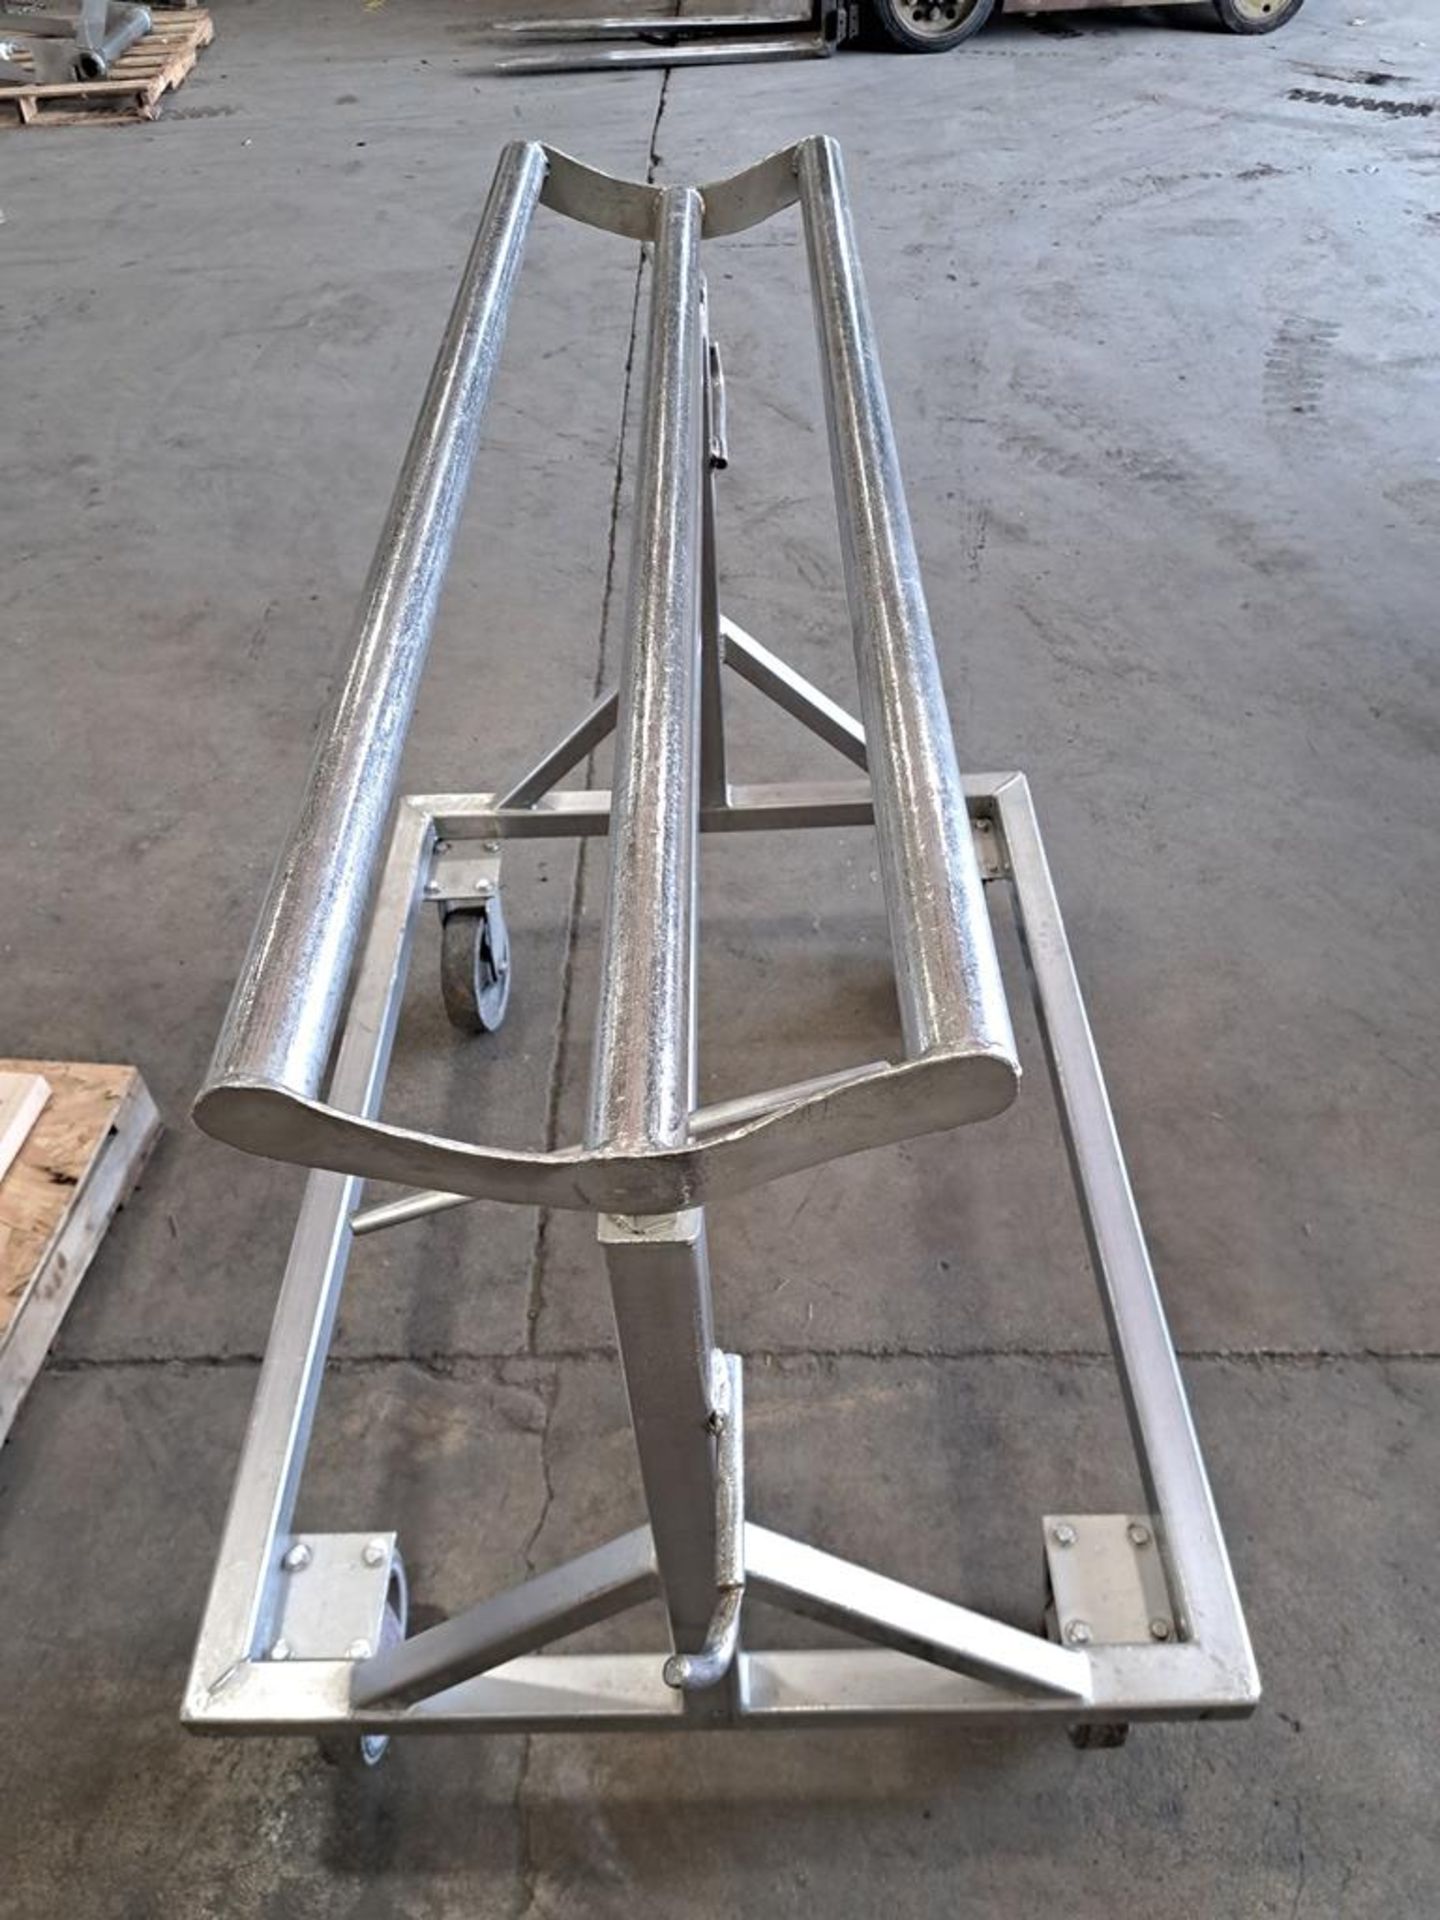 Stainless Steel Auger Cart, 48" Long carriage, Located In Plano, IL (Required Loading Fee: $25. - Image 3 of 3